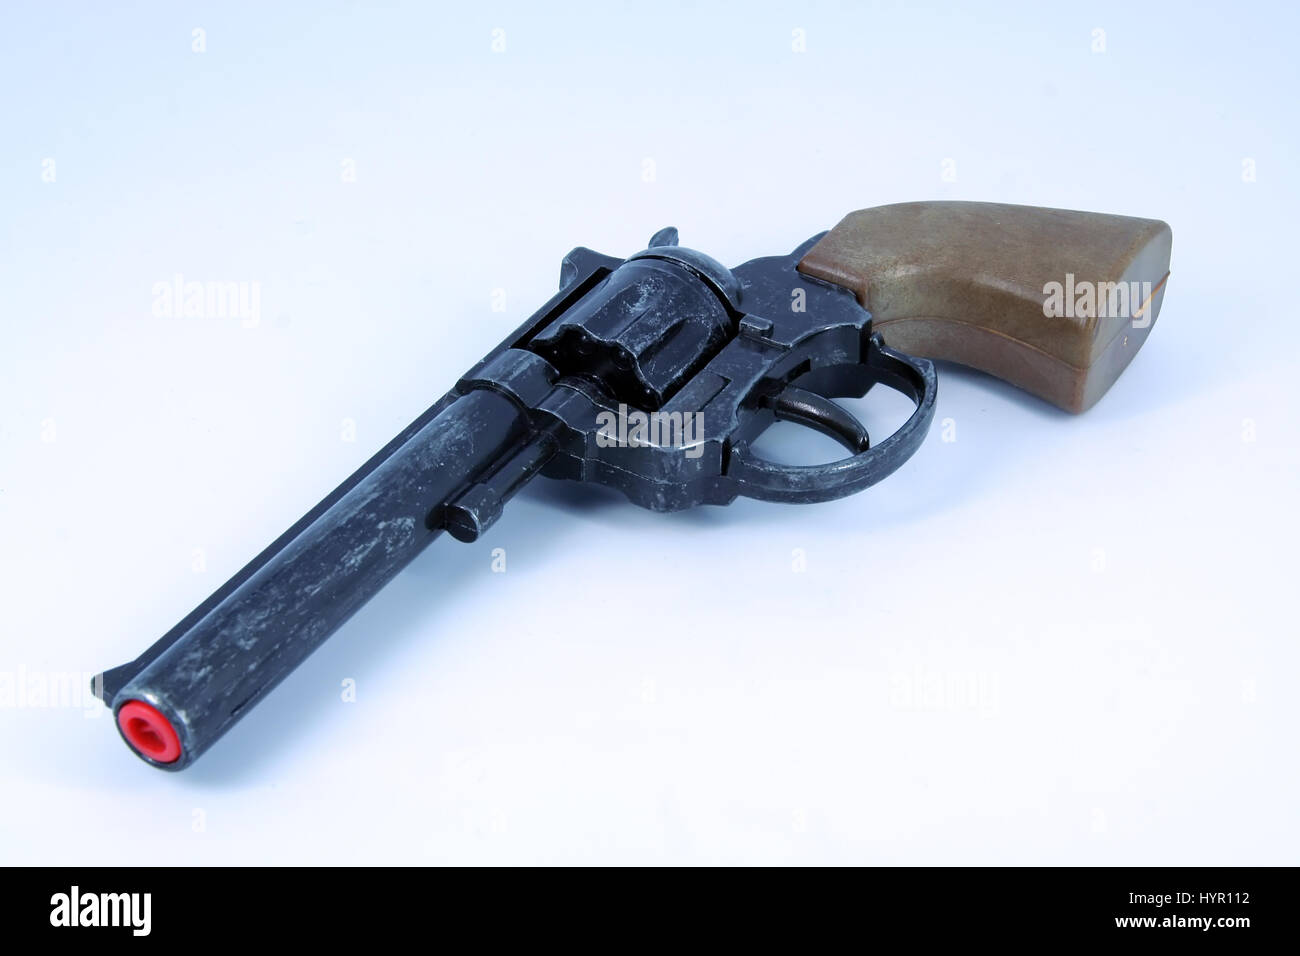 Toy model of a gun. Toy model of a pistol. Stock Photo